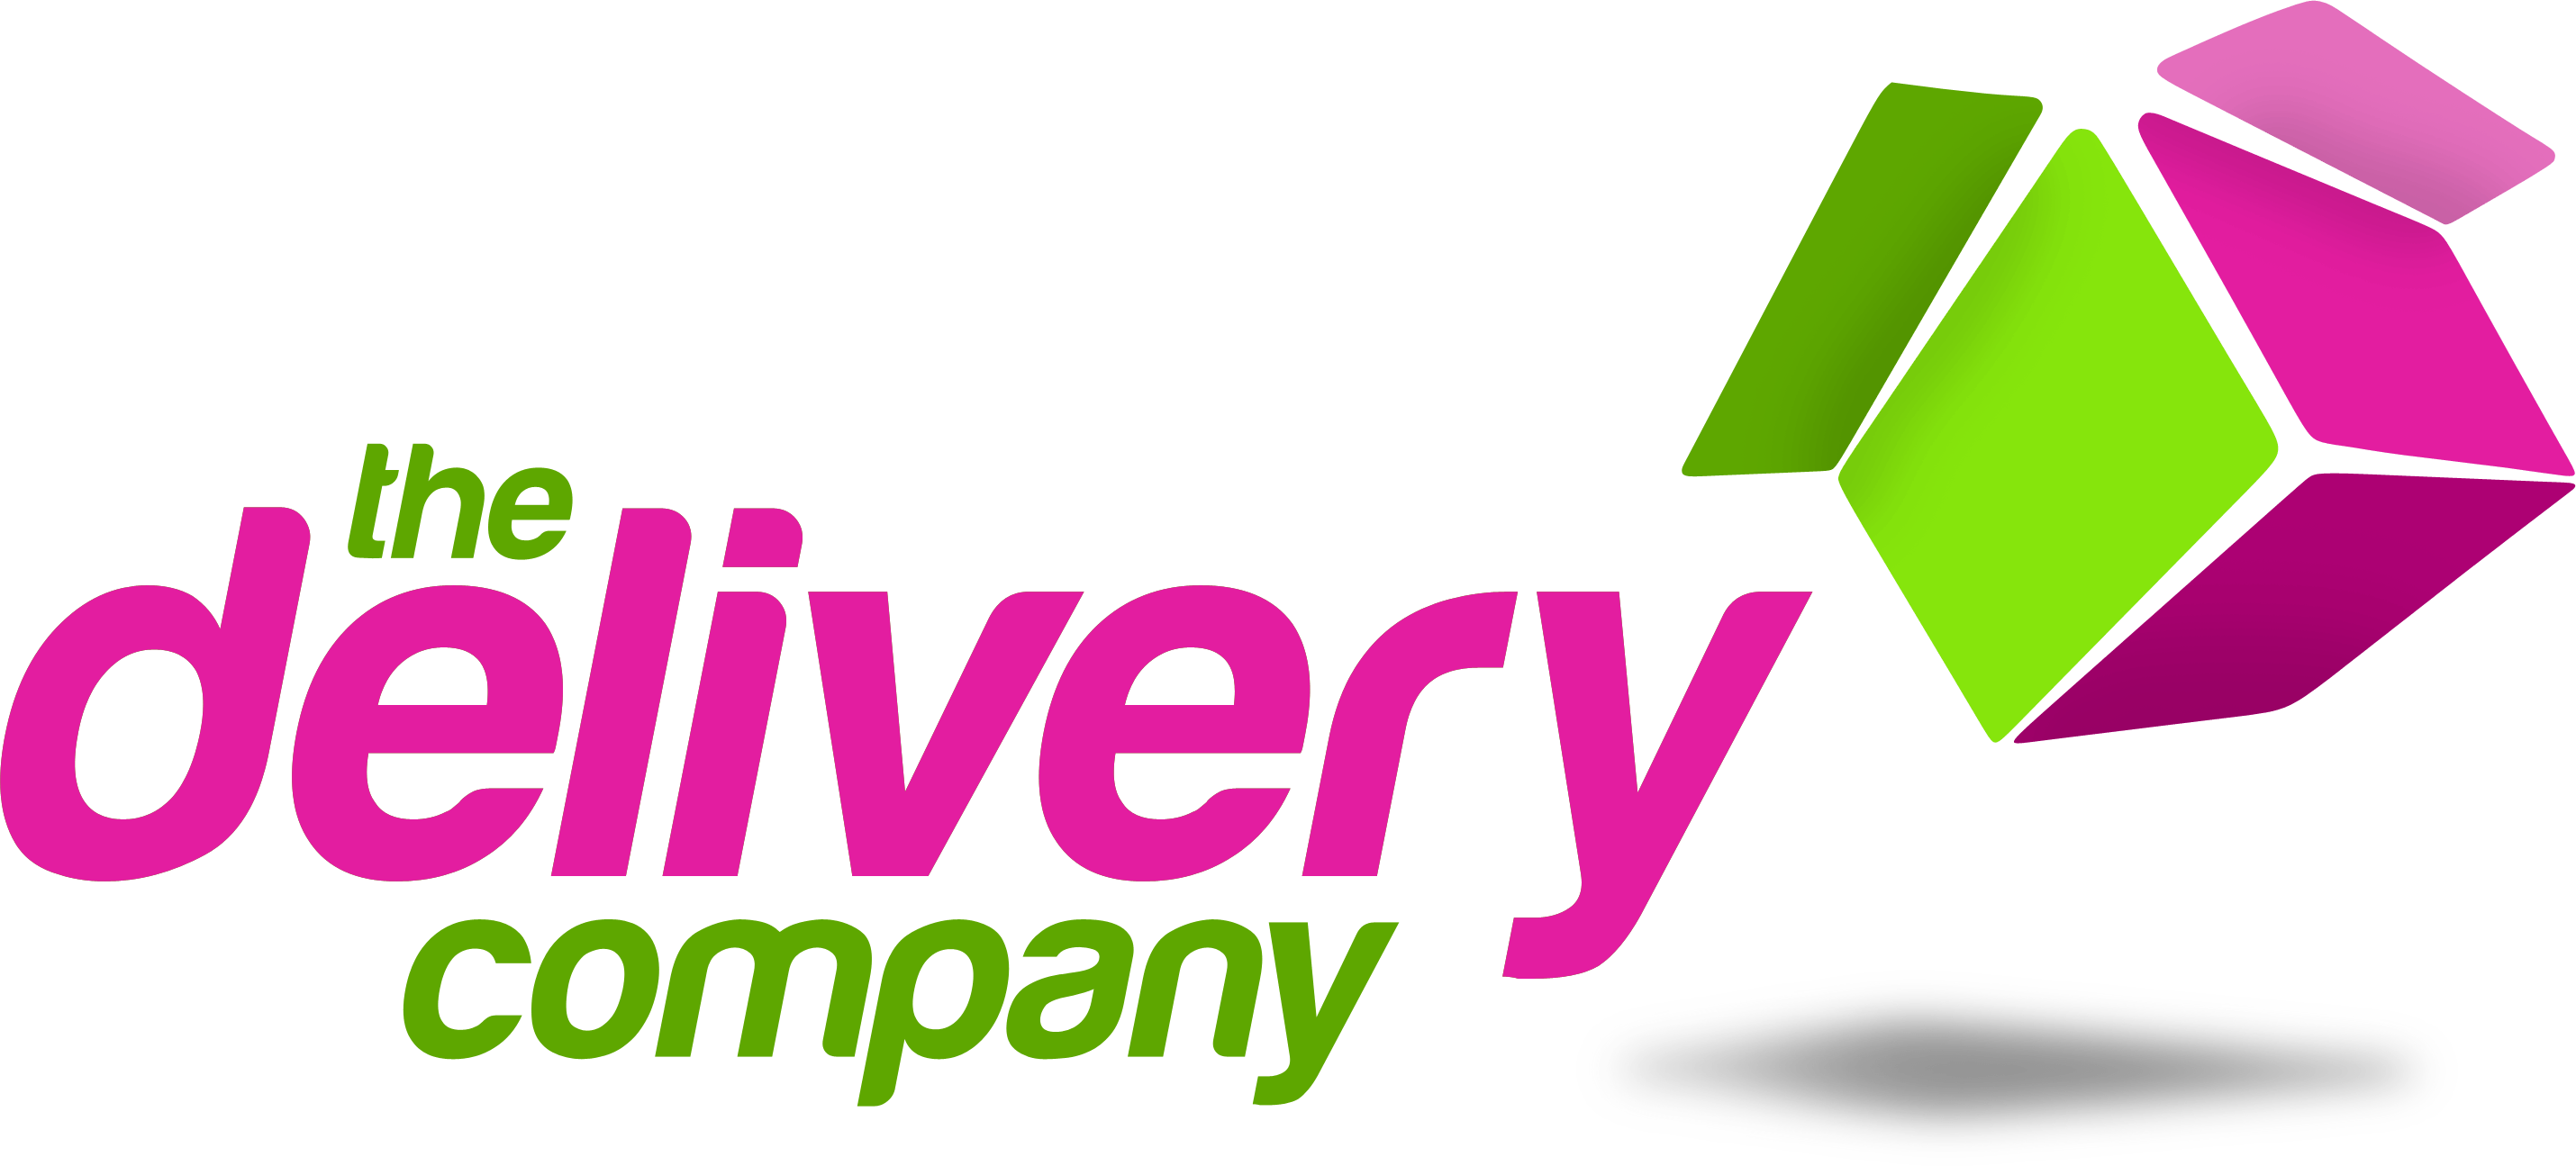 Delivery Company Logo - New London Van Sharing Company Now Offers Shared Delivery Service To ...